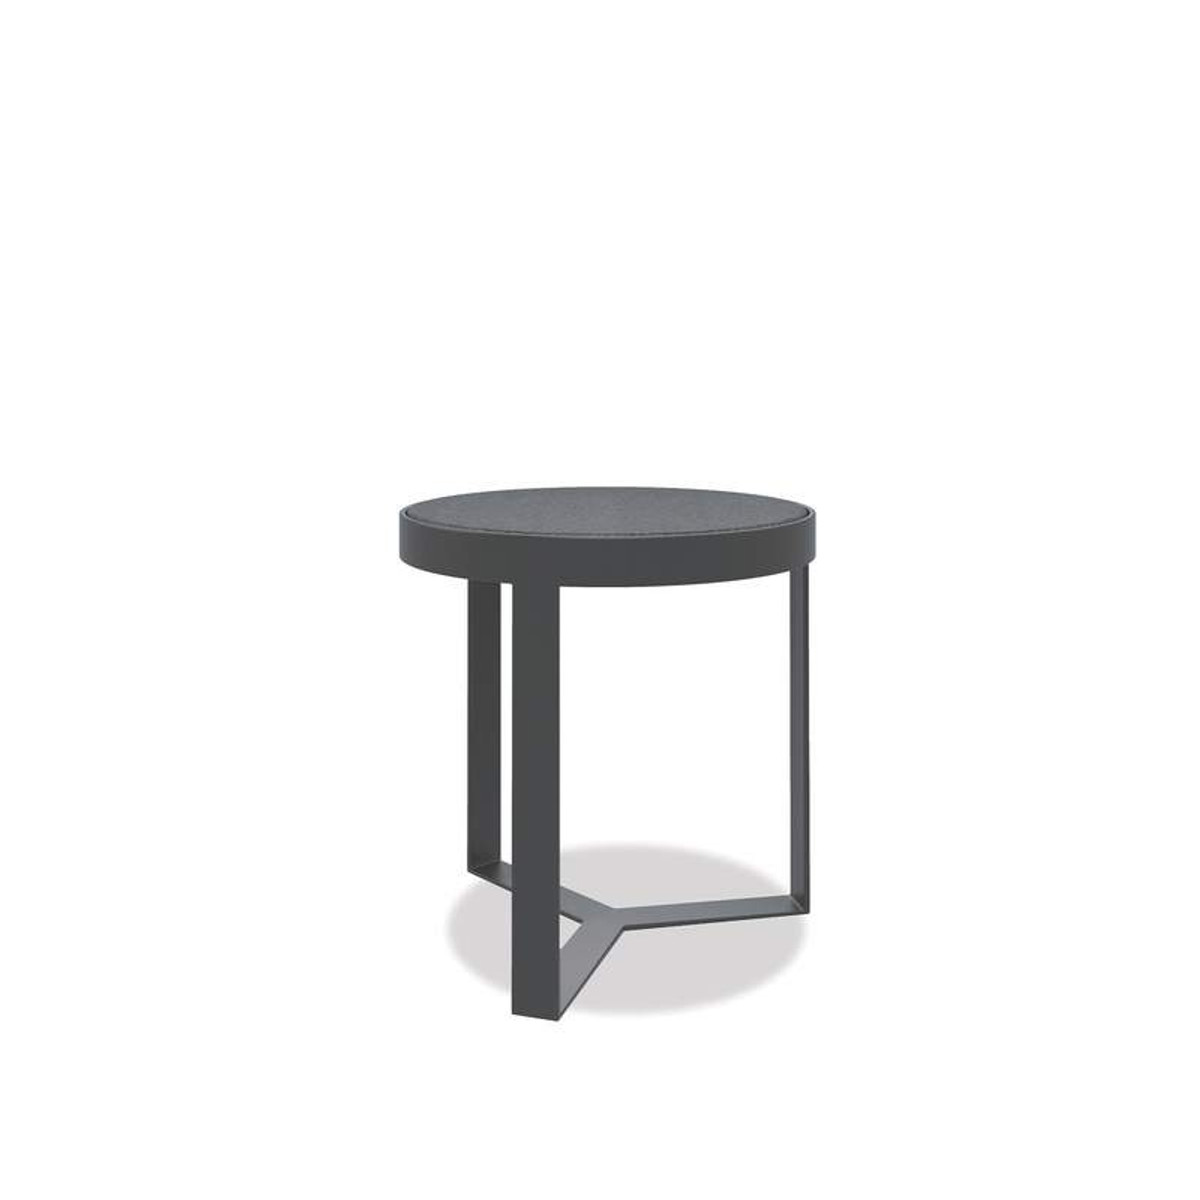 Bazaar 18" Polished Granite Round End Table